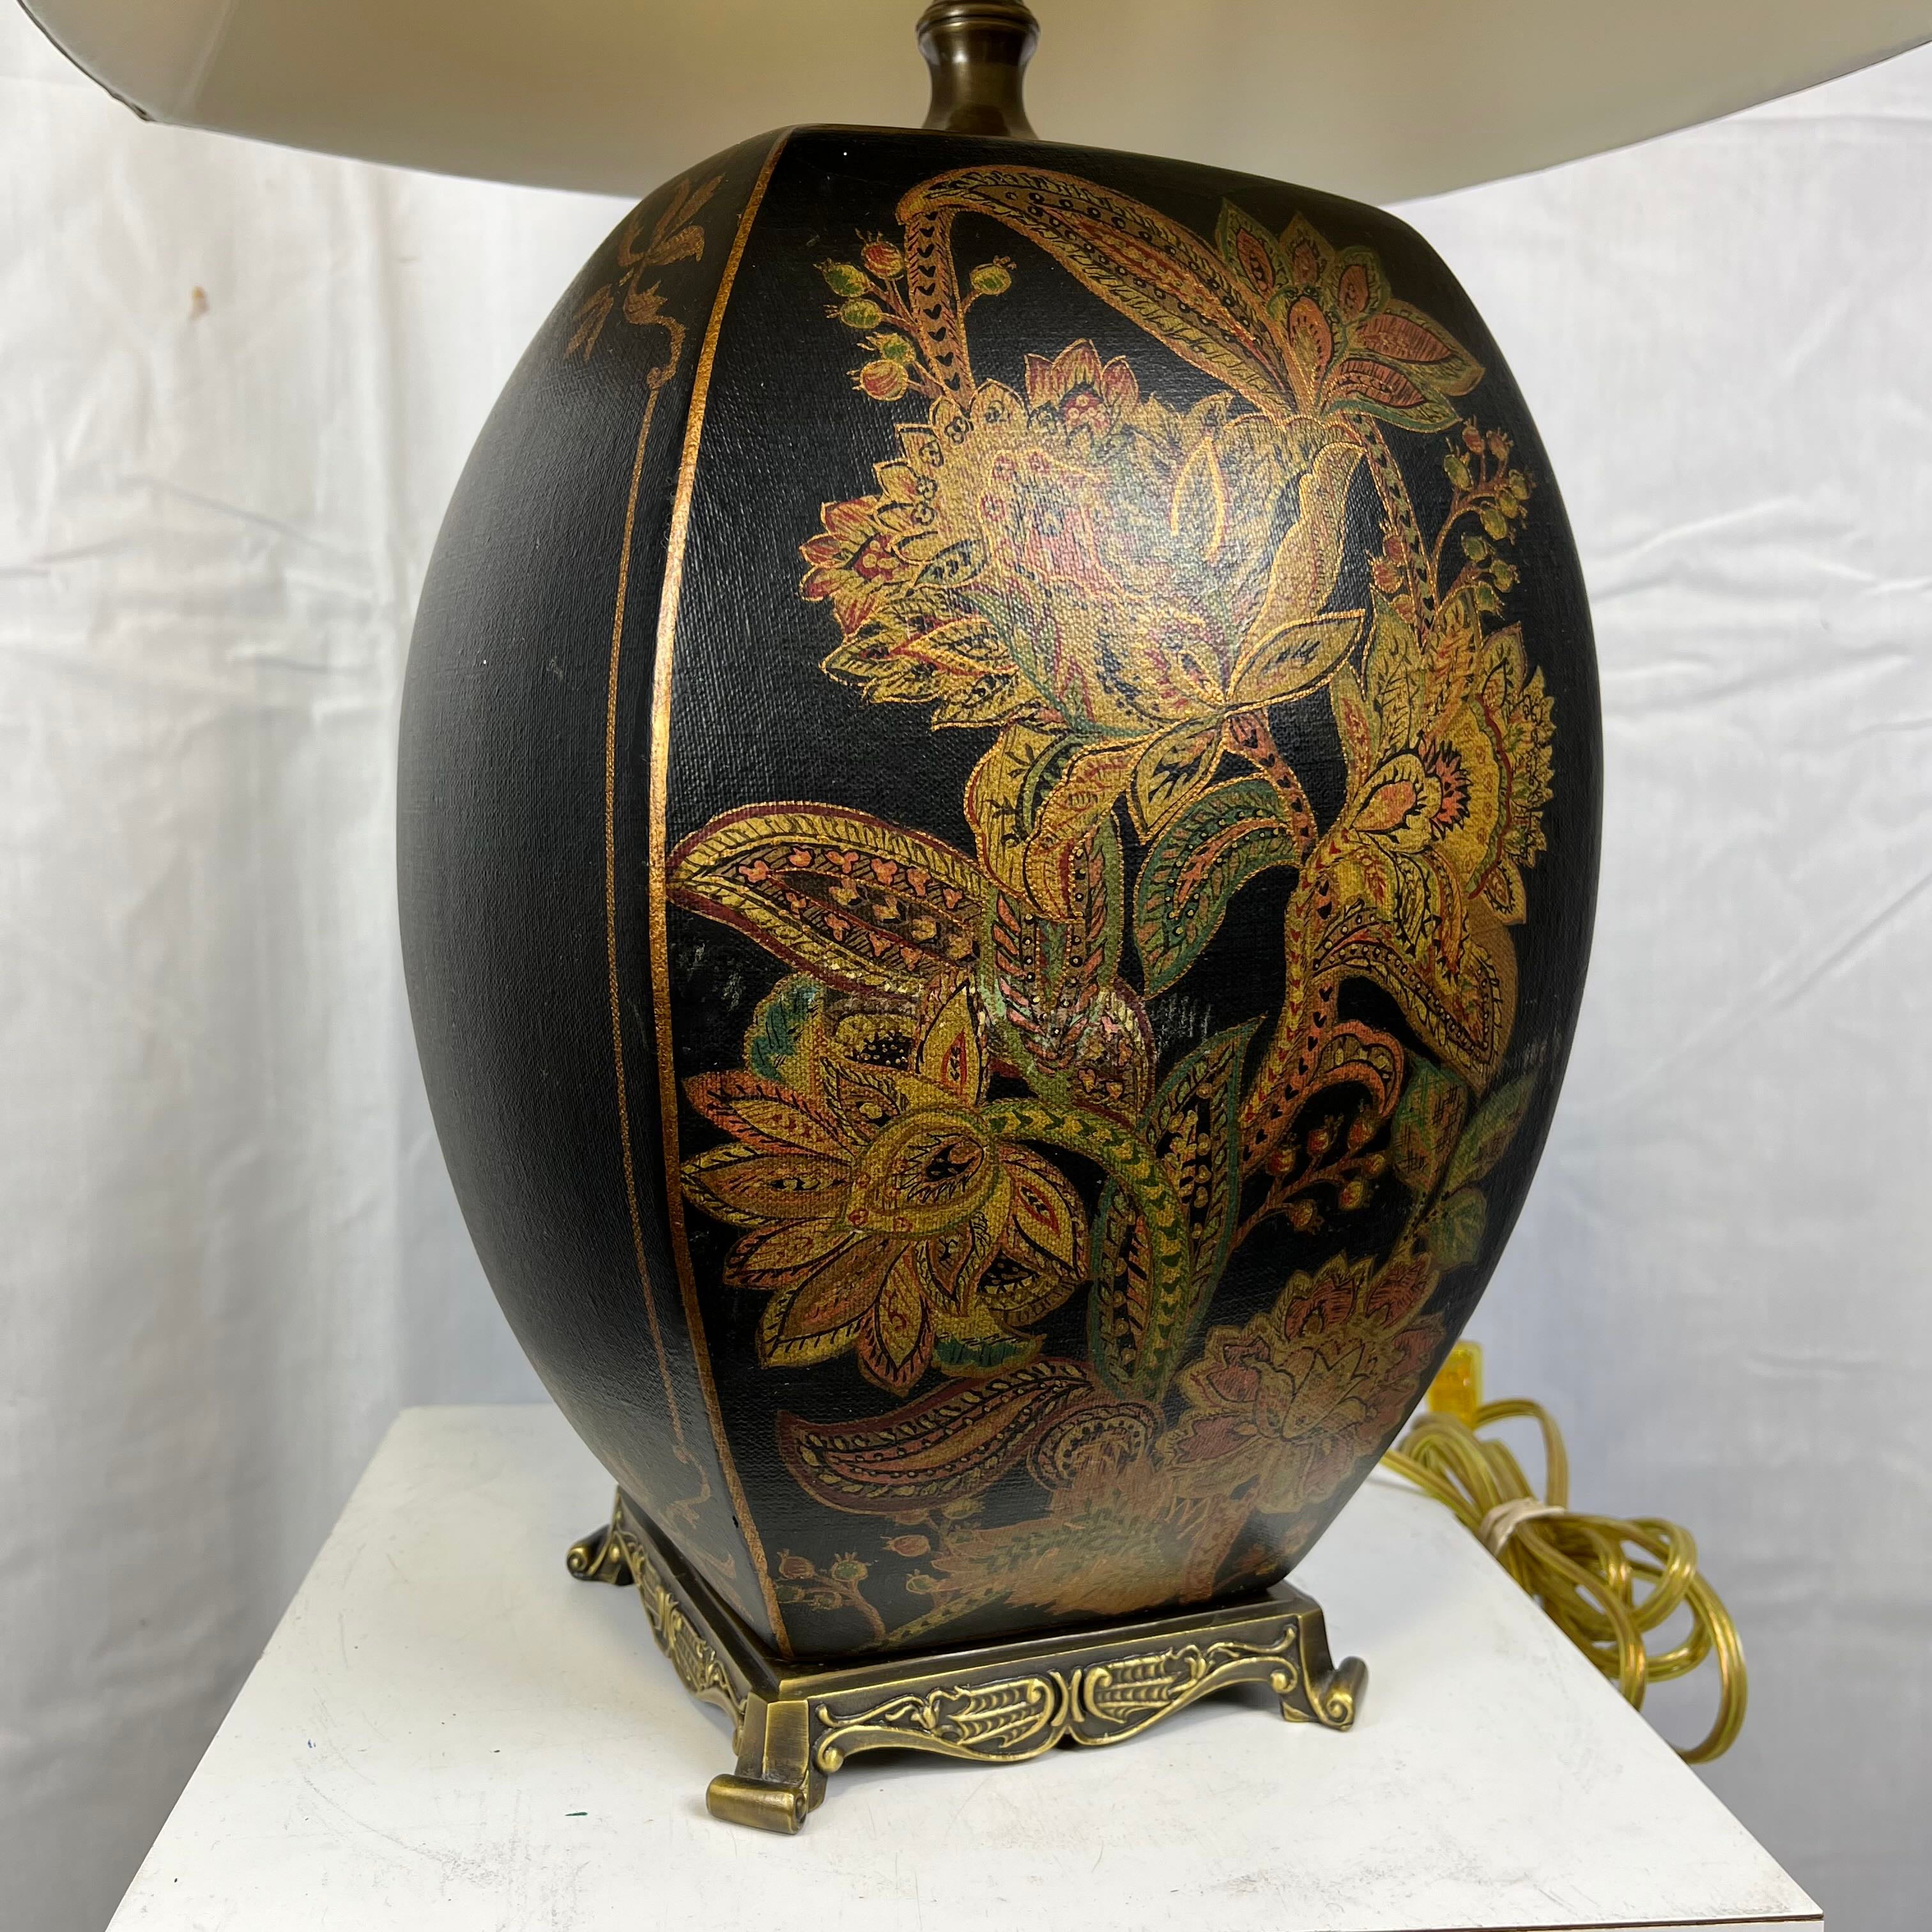 18"x 12"x 34.5" Black Metal Asian Style Design on Wood Base with Shade Table Lamp